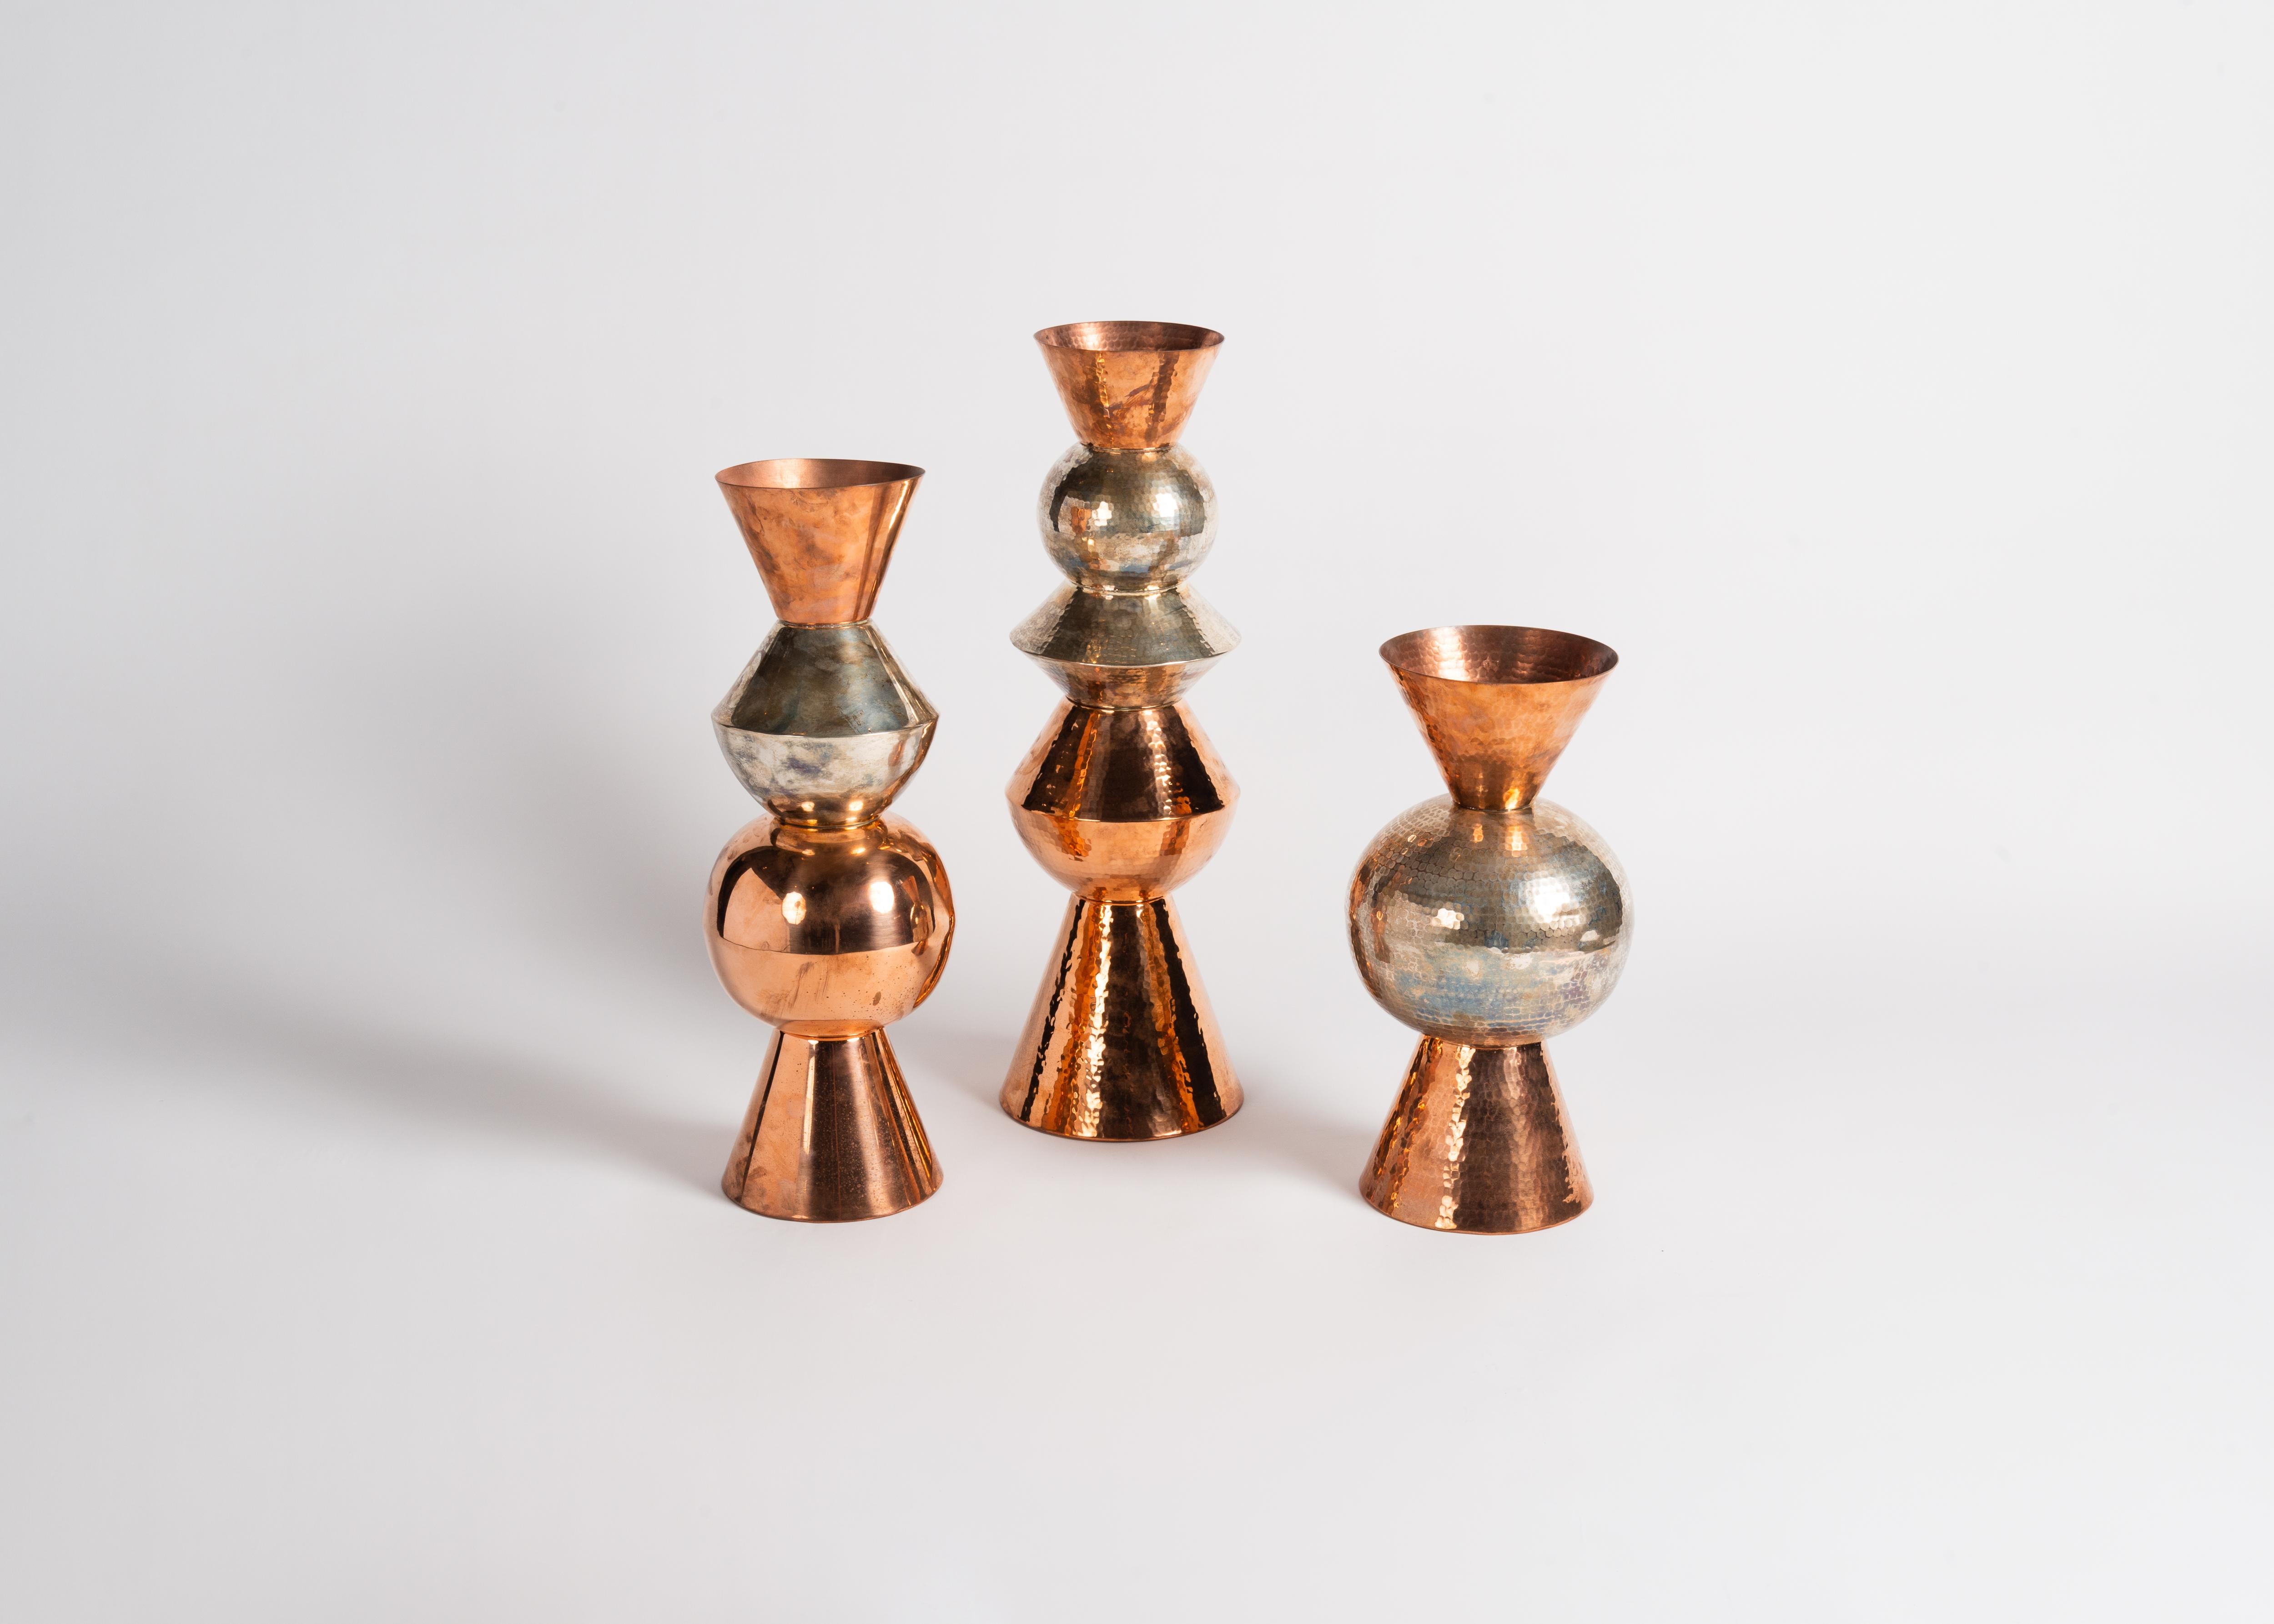 One of a series of beautiful, lobed vases created by American designer Laura Kirar in collaboration with 5th-generation artisans in Michoacan, Mexico. To create these remarkable pieces, raw copper is heated and hand hammered into shape before adding